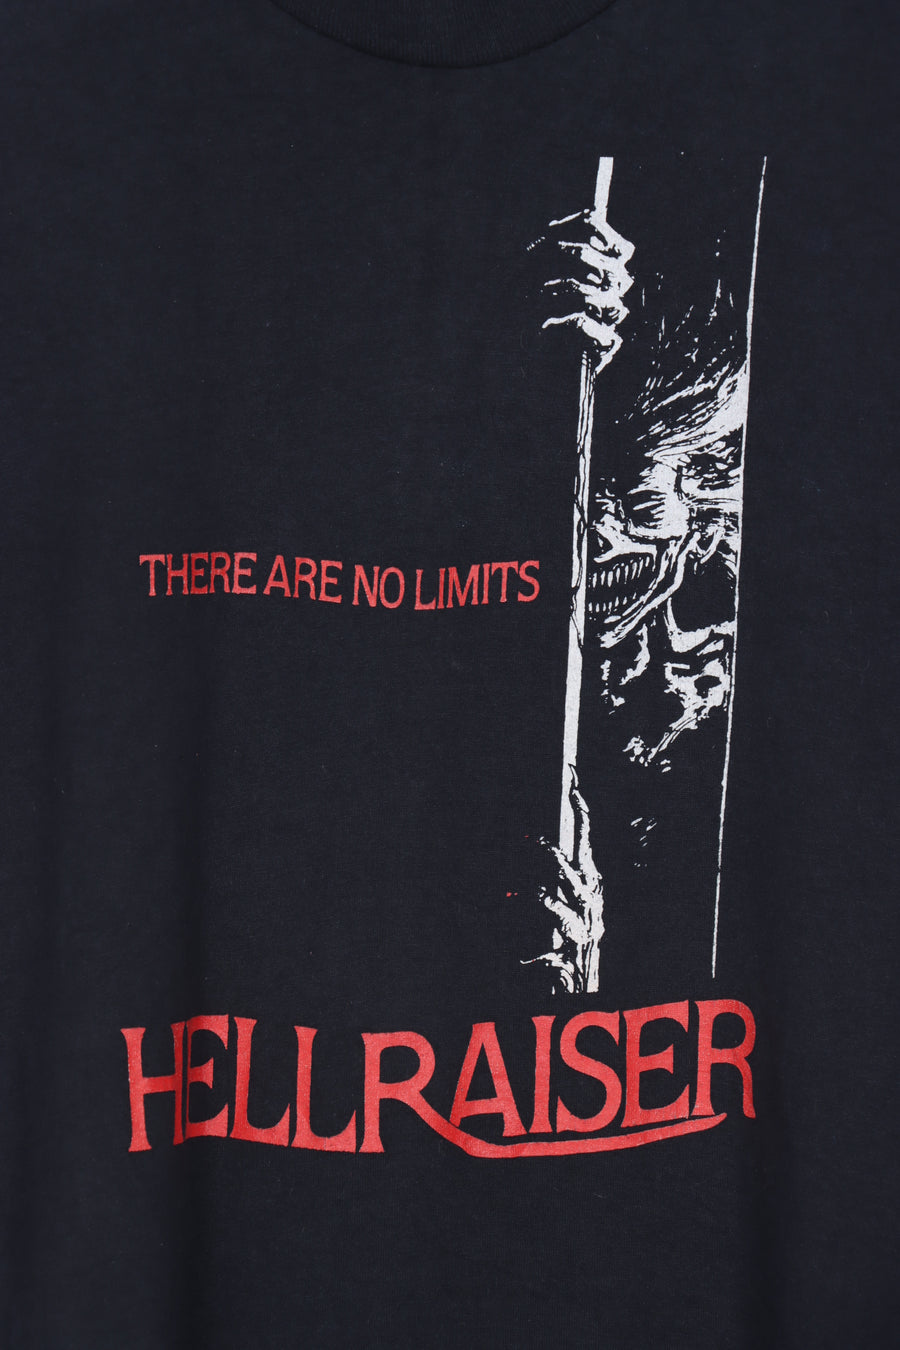 HELLRAISER 'There are no Limits' Horror Thin 50/50 Tee (M)